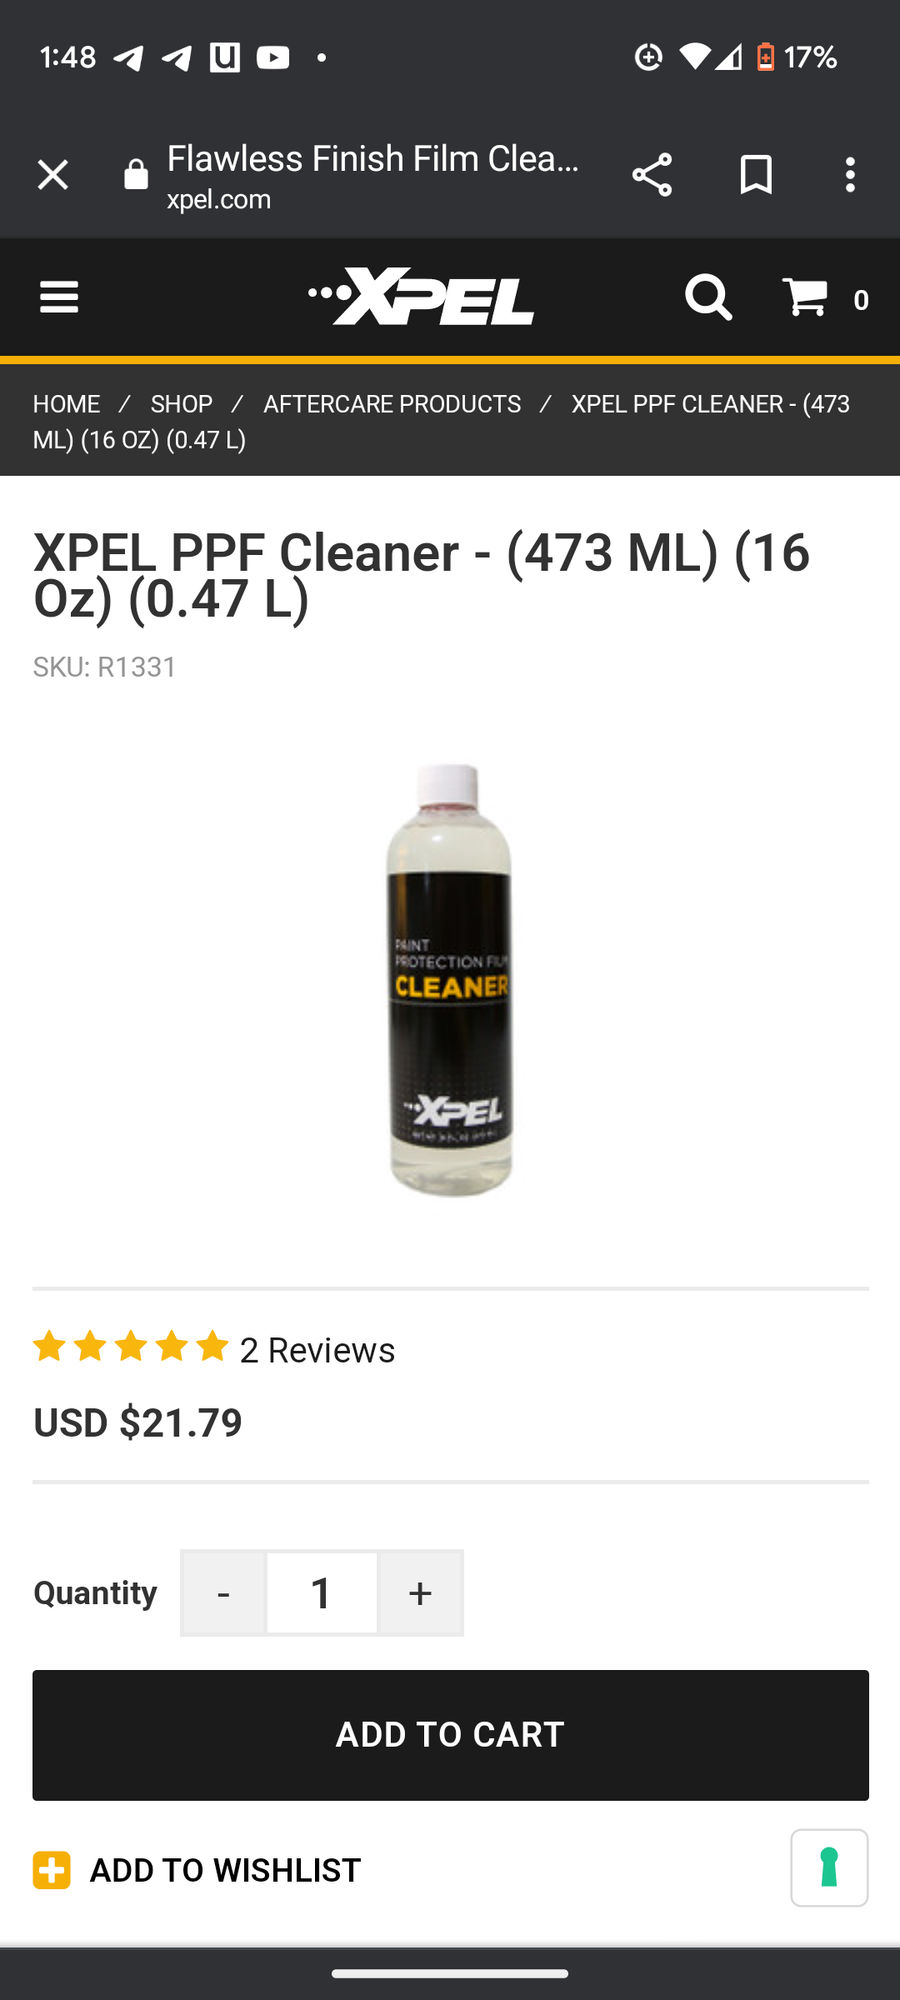 XPEL PPF Cleaner - (473 mL) (16 oz) (0.47 L)